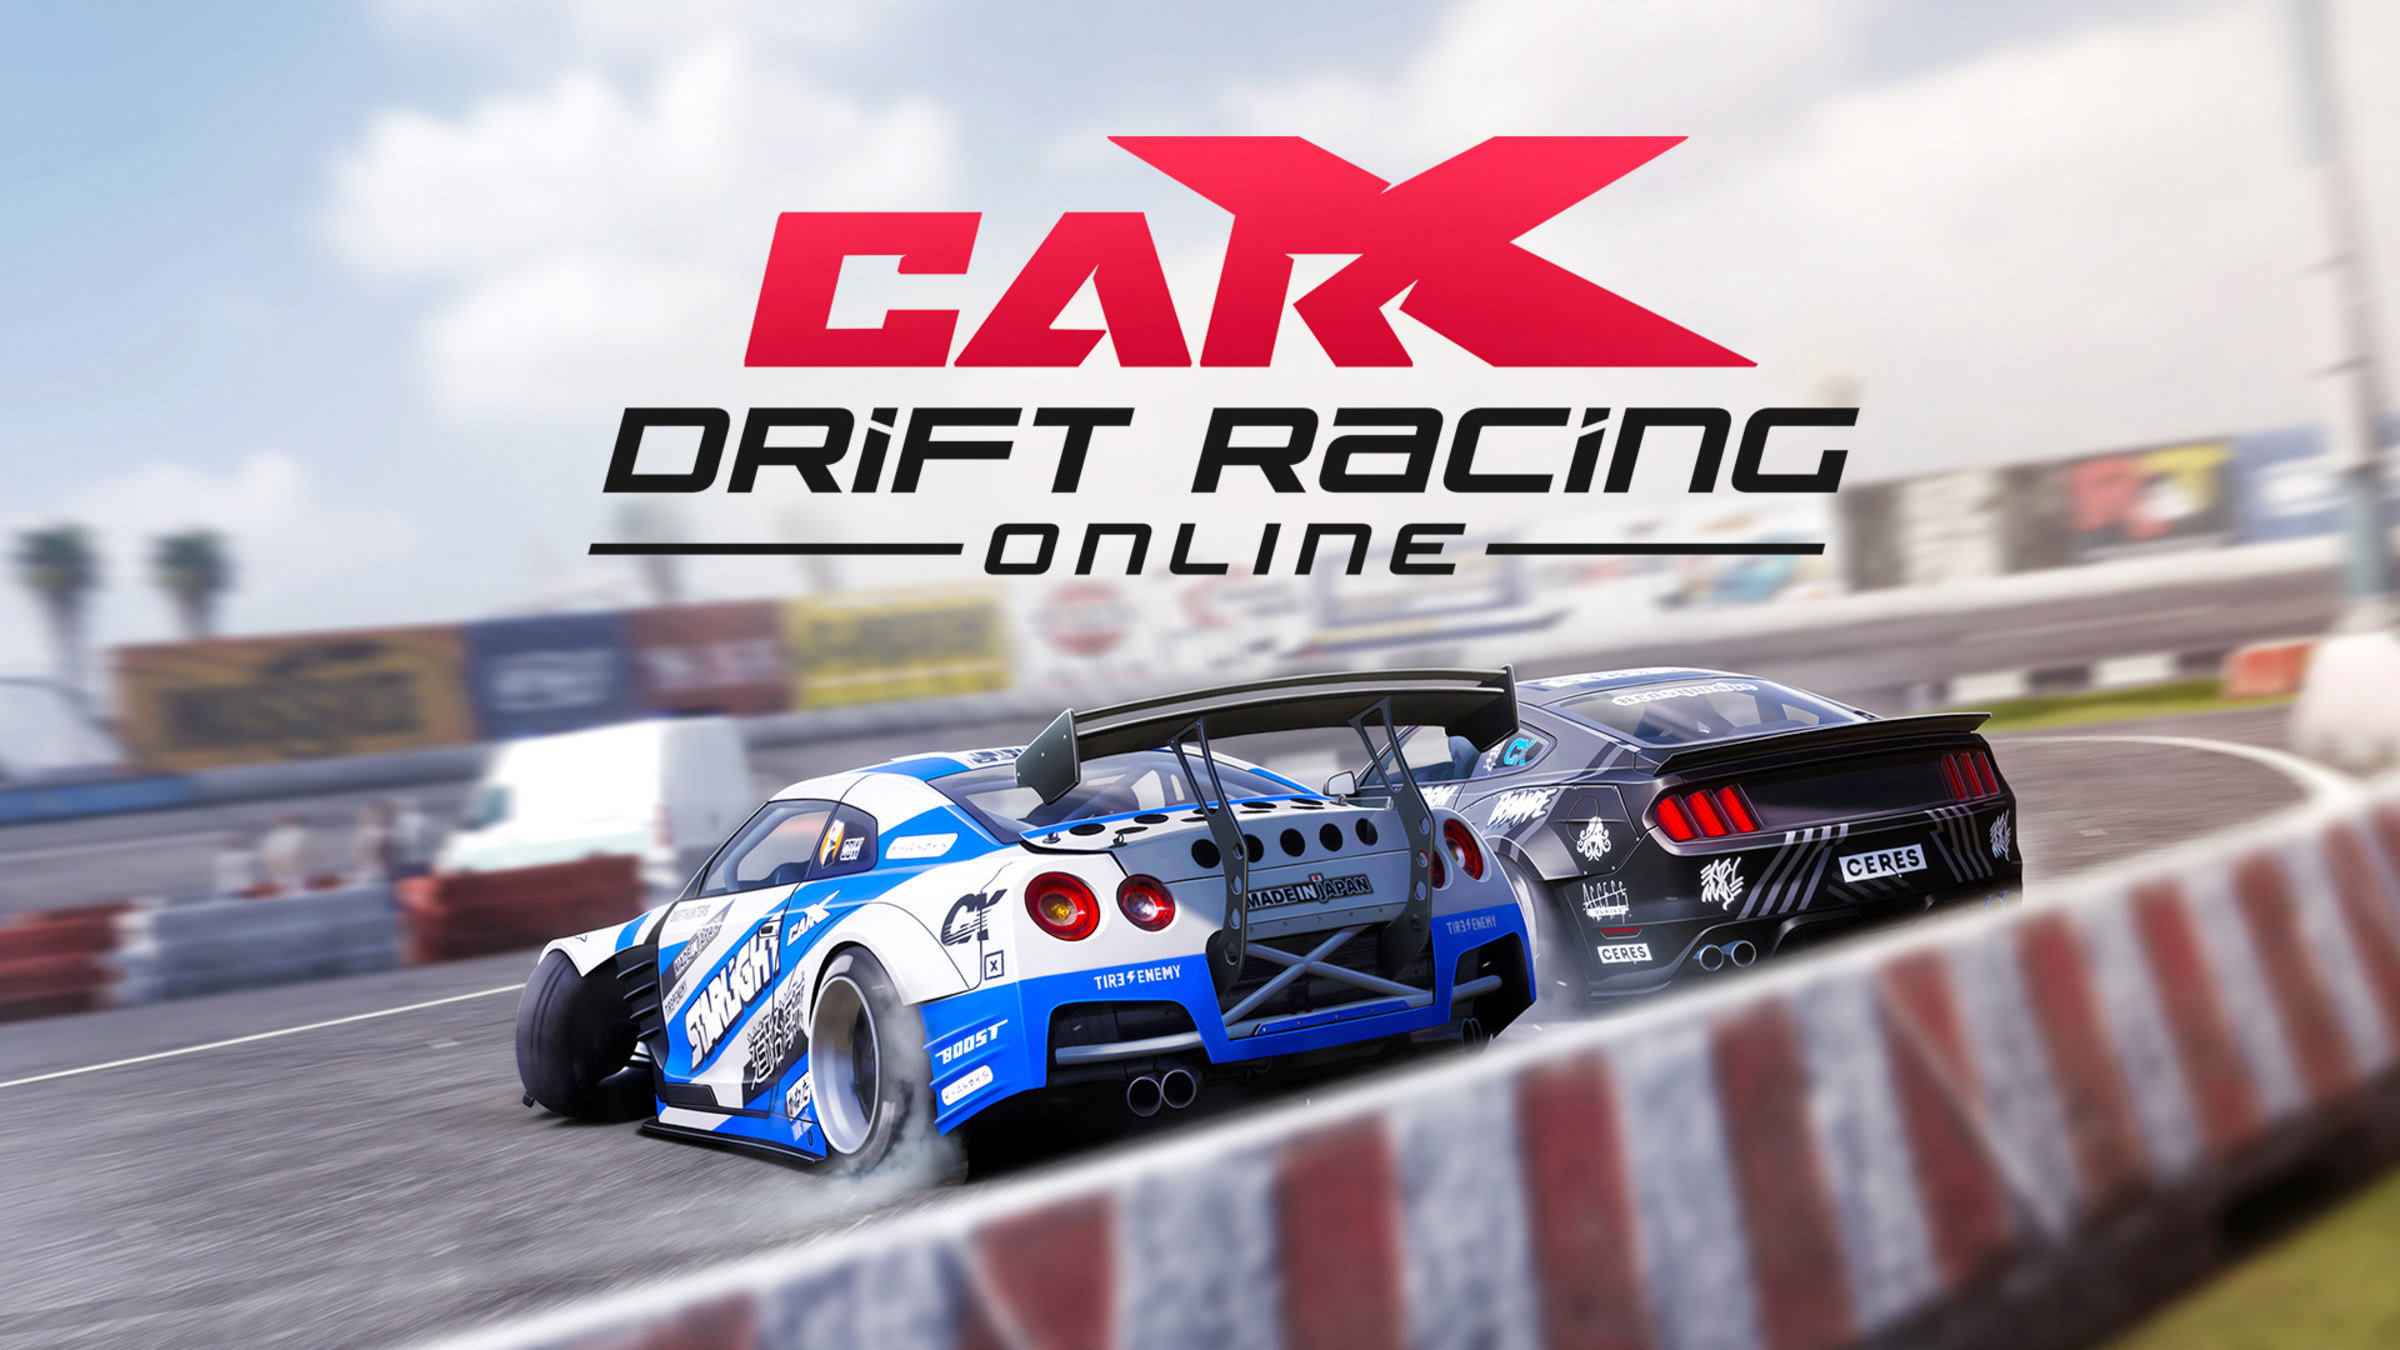 Carx Drift Racing Online For Nintendo Switch - Nintendo Official Site